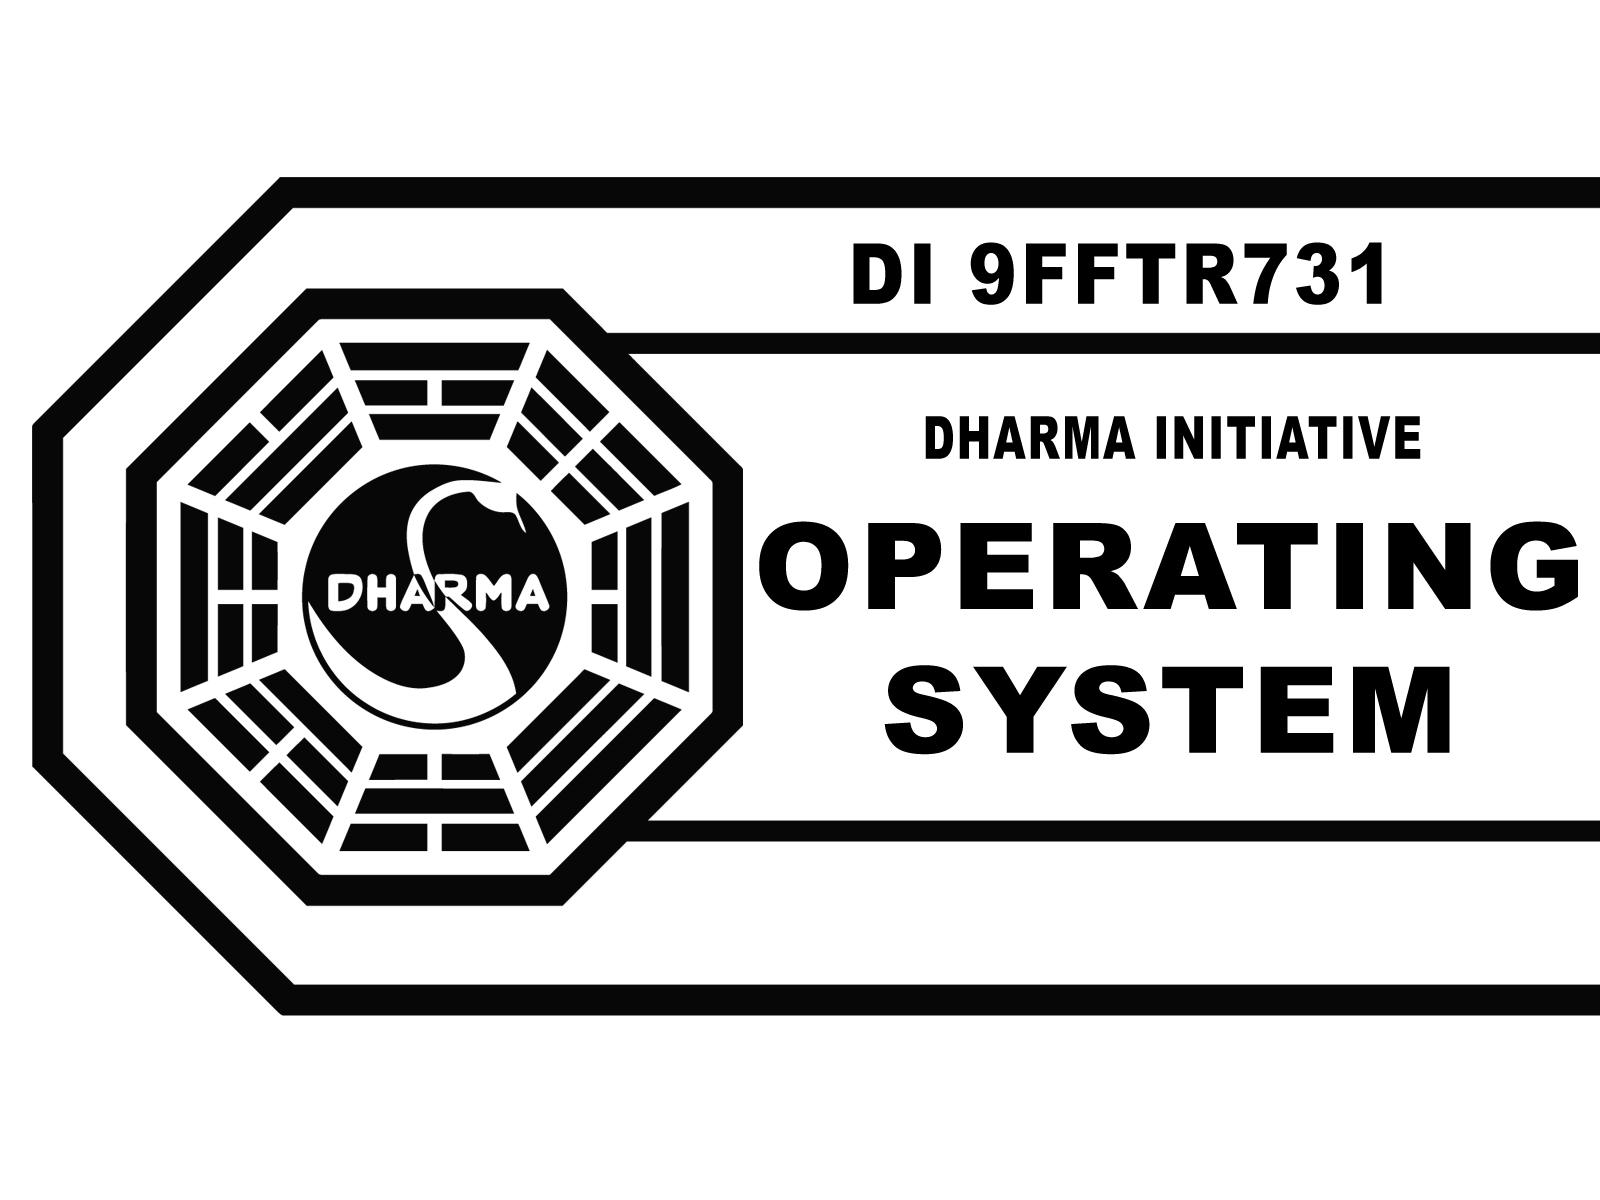 Lost_DHARMA_OS_Wallpaper_by_bschulze.jpg